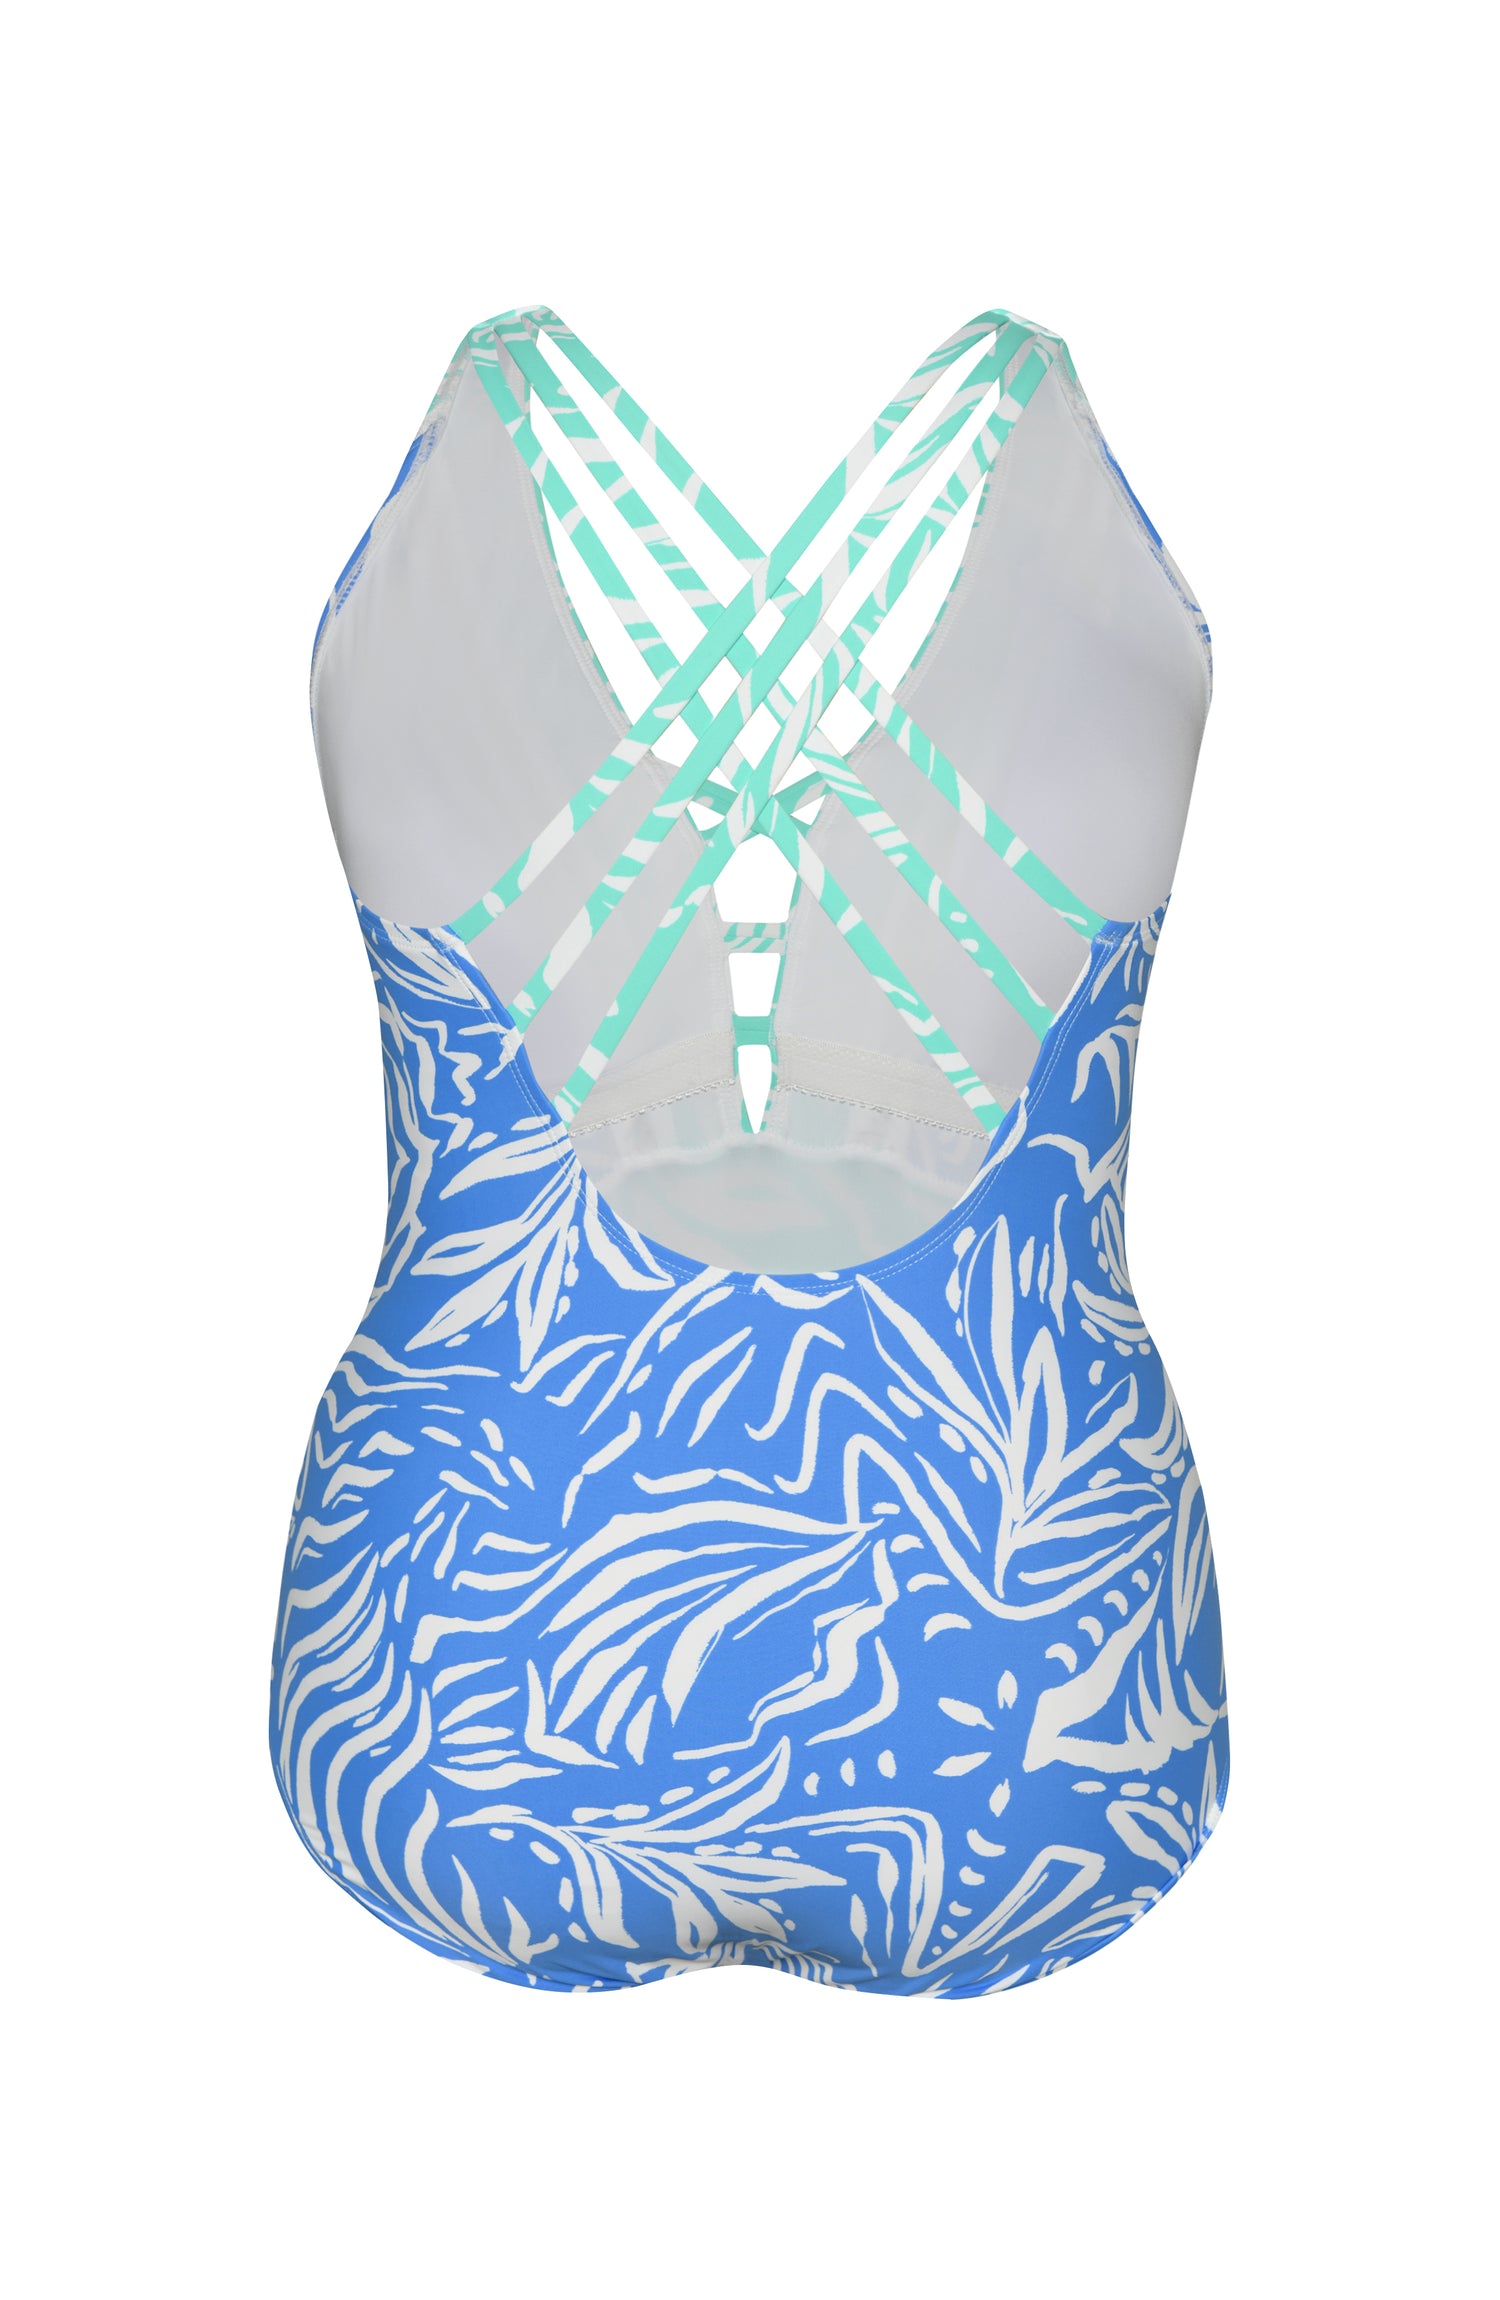 Two-toned one piece swimsuit with bold white botanical motifs on a background of contrasting shades of blue.